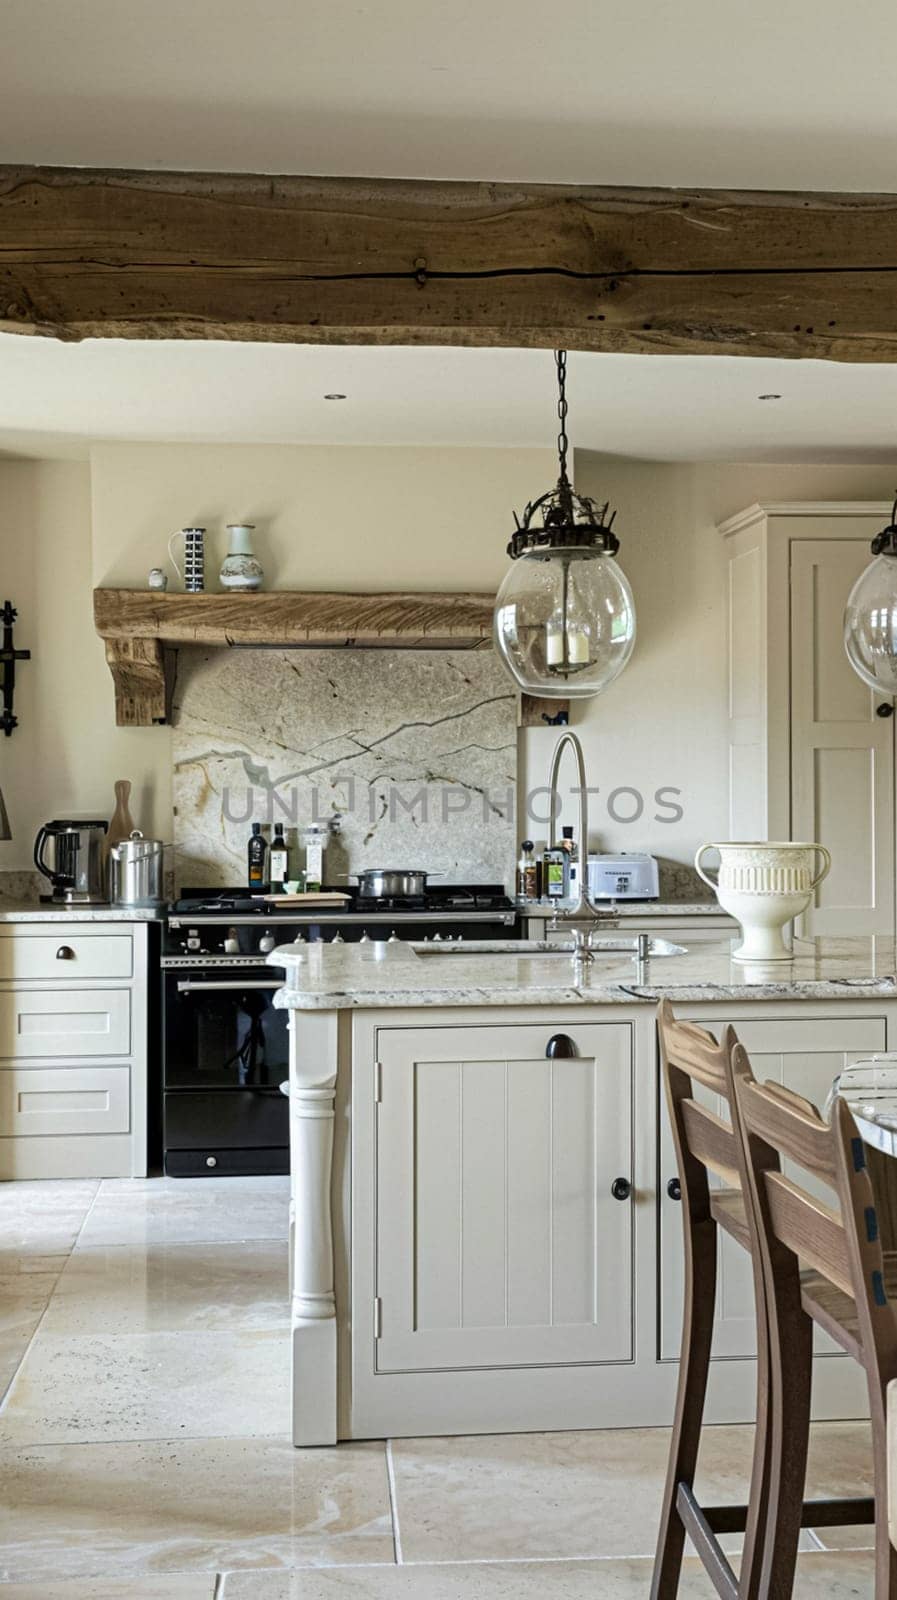 Bespoke kitchen design, country house and cottage interior design, English countryside style renovation and home decor by Anneleven